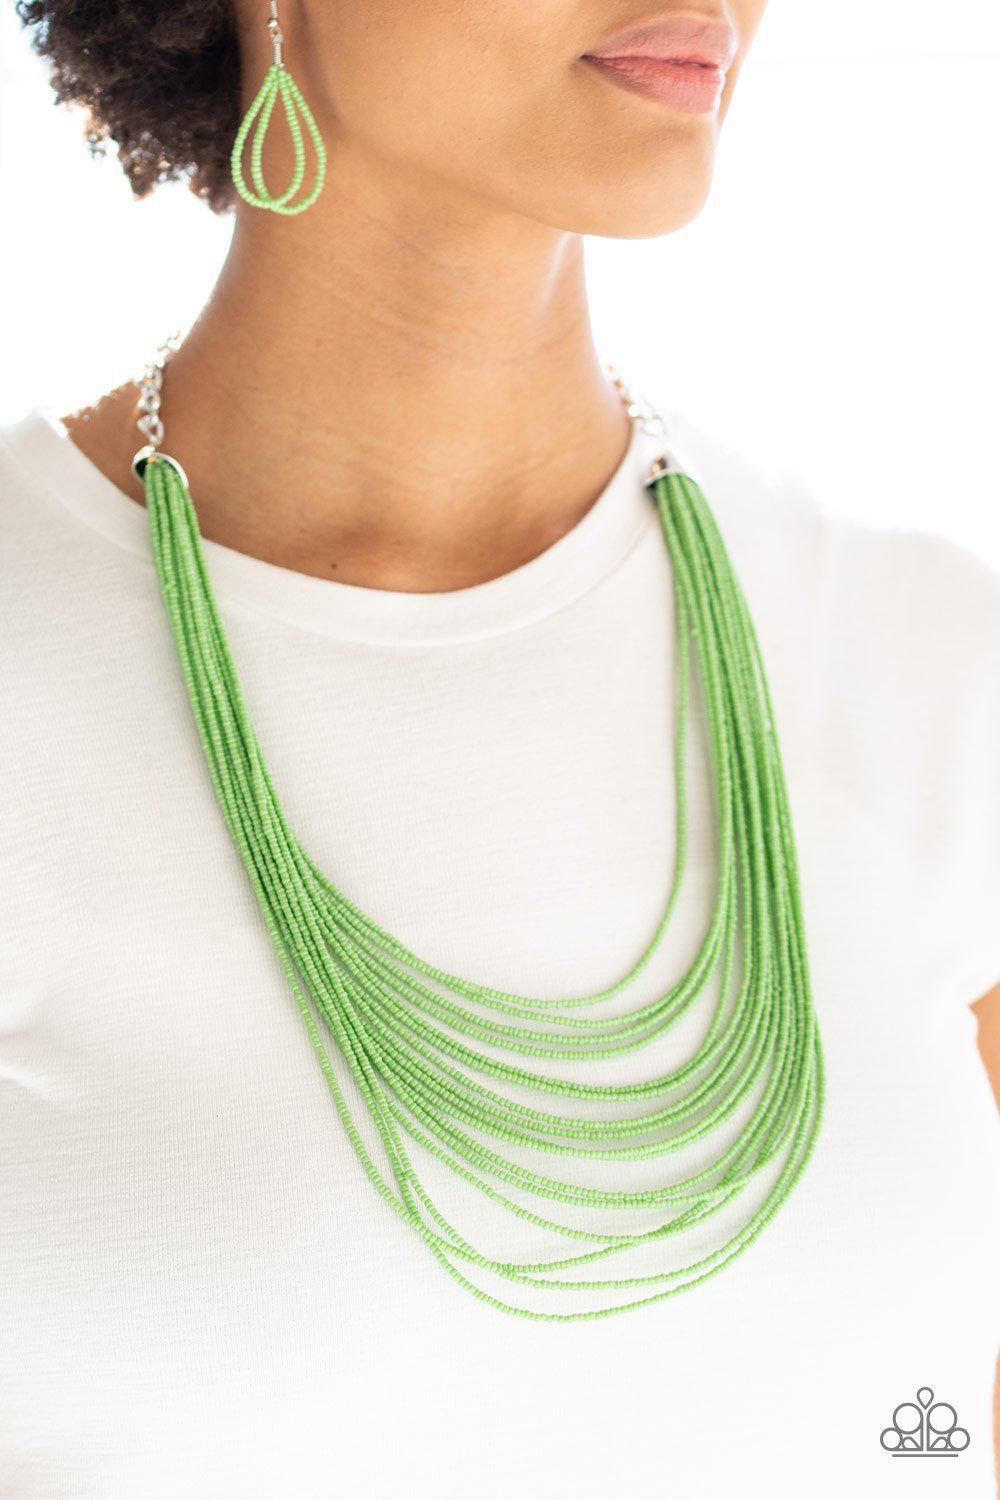 Peacefully Pacific Green Seed Bead Necklace and matching Earrings - Paparazzi Accessories-CarasShop.com - $5 Jewelry by Cara Jewels